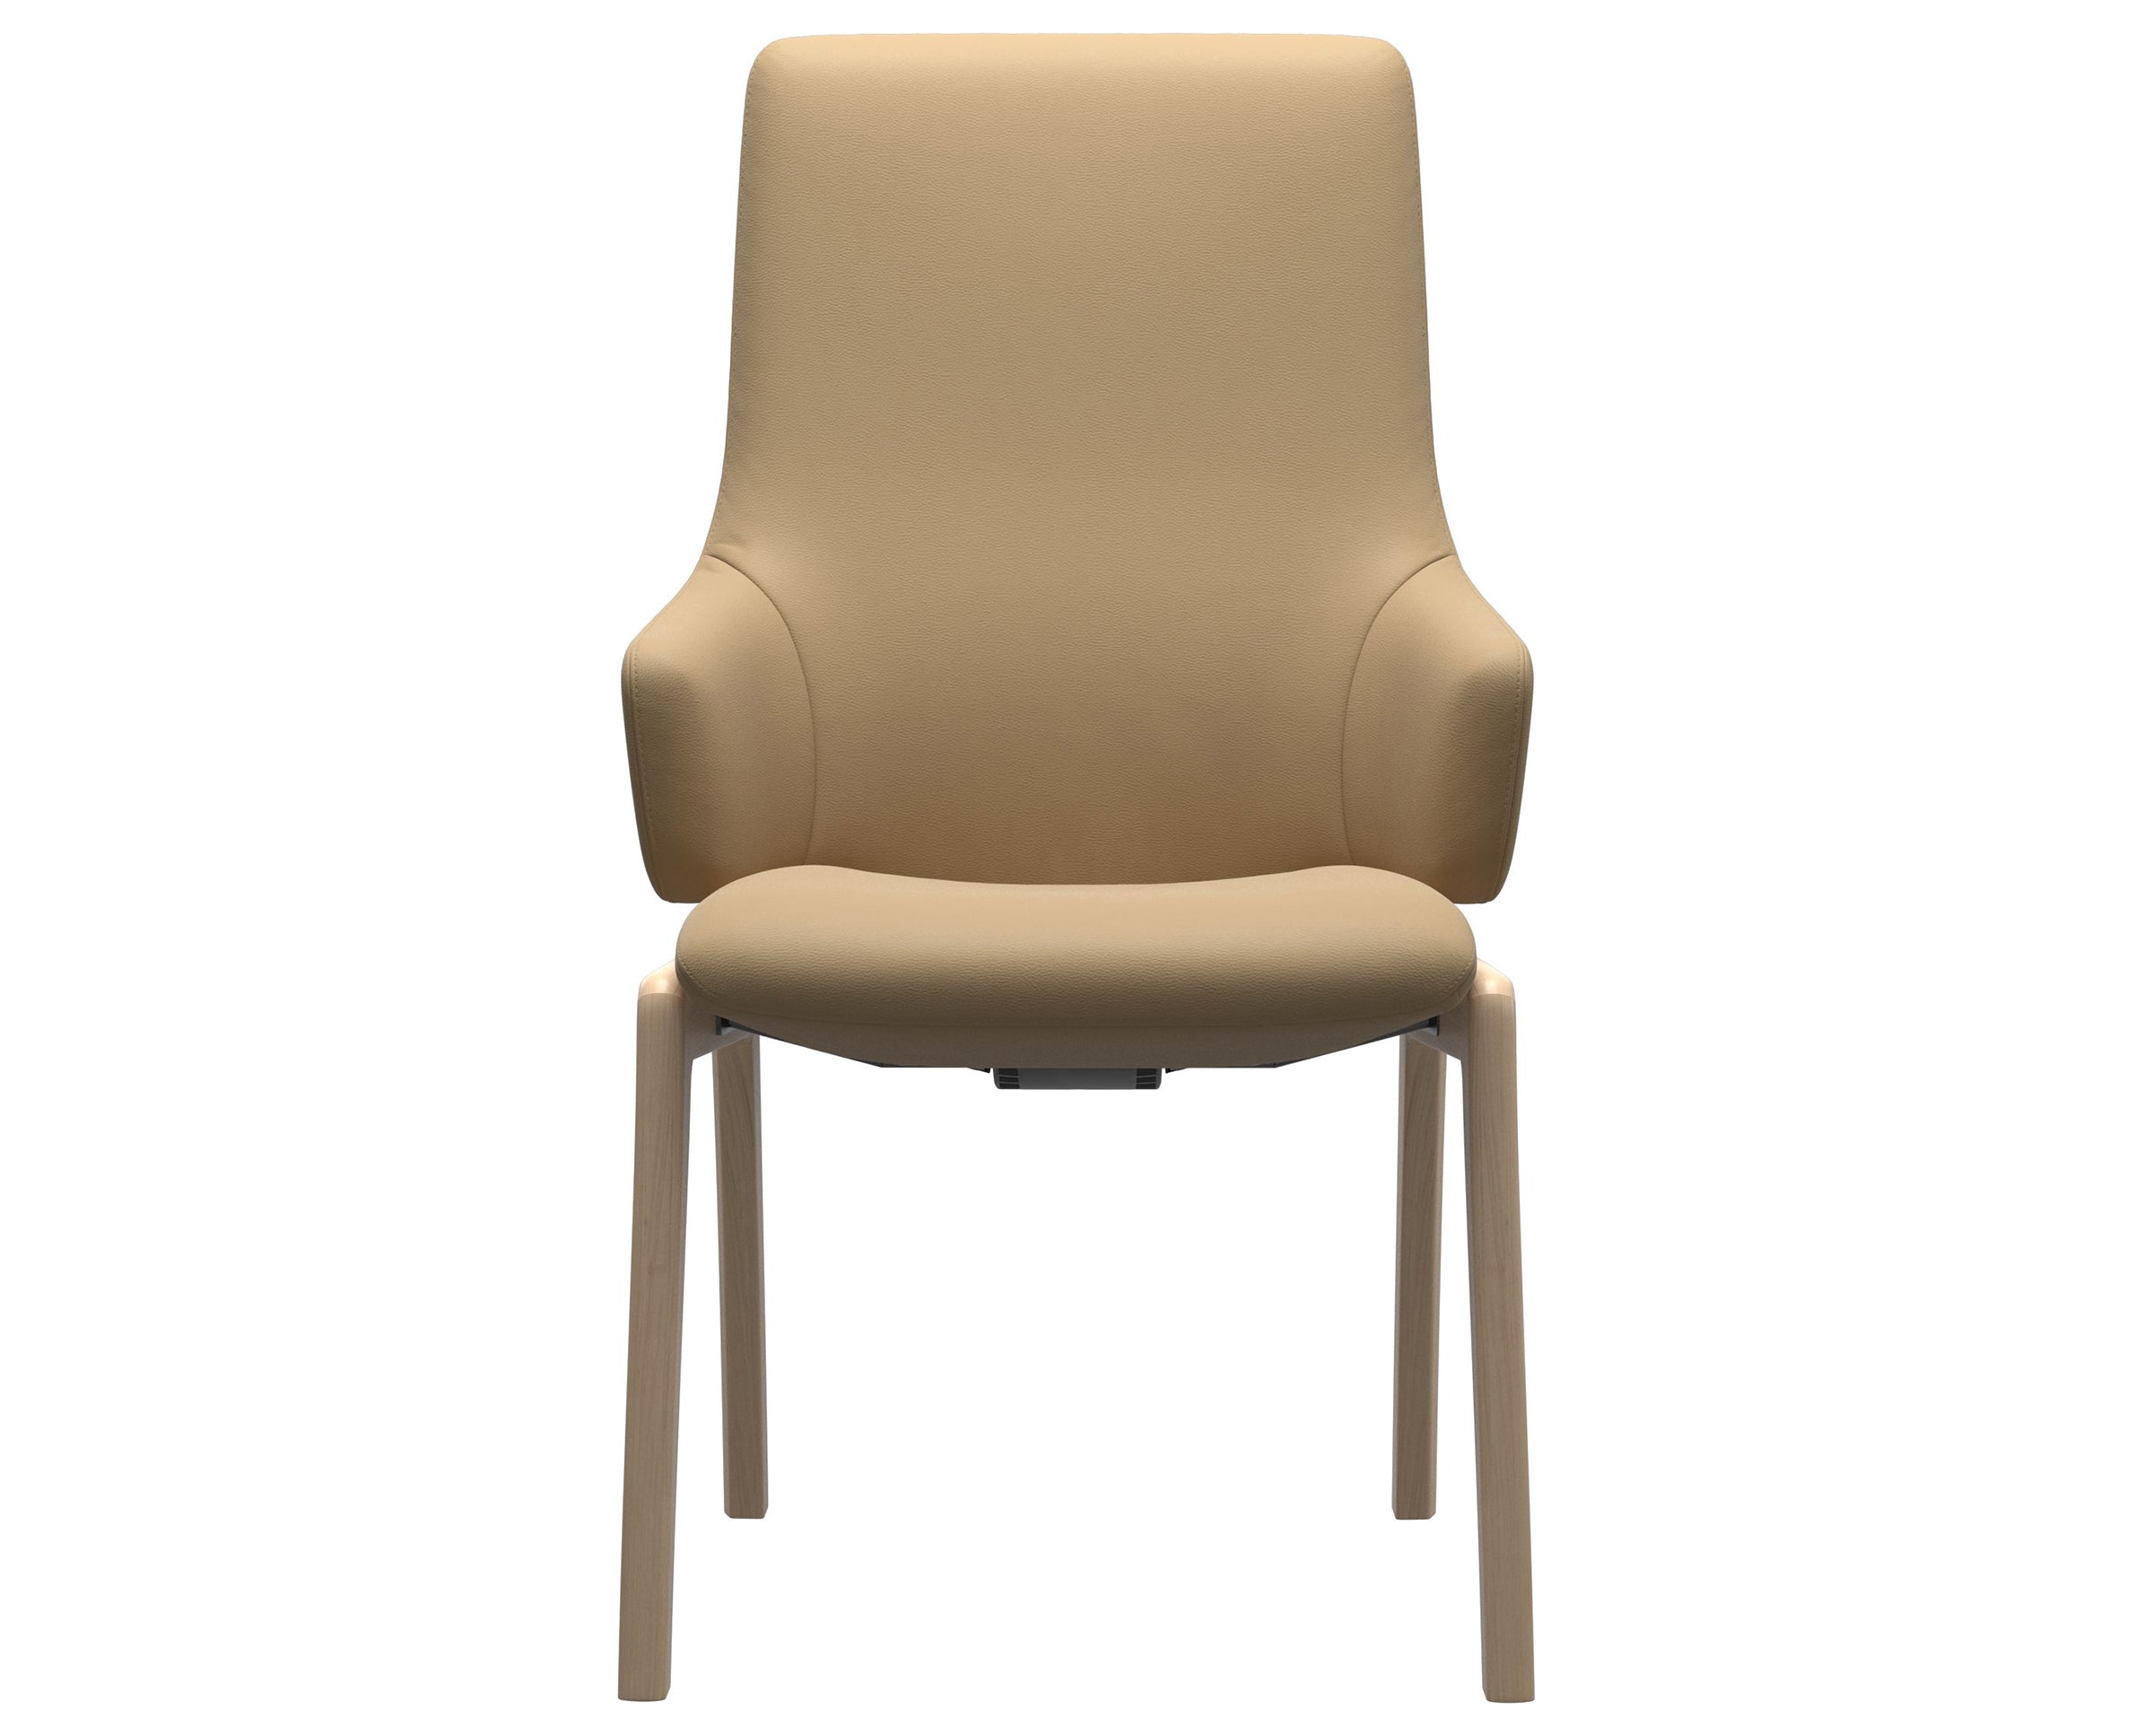 Paloma Leather Sand and Natural Base | Stressless Laurel High Back D100 Dining Chair w/Arms | Valley Ridge Furniture